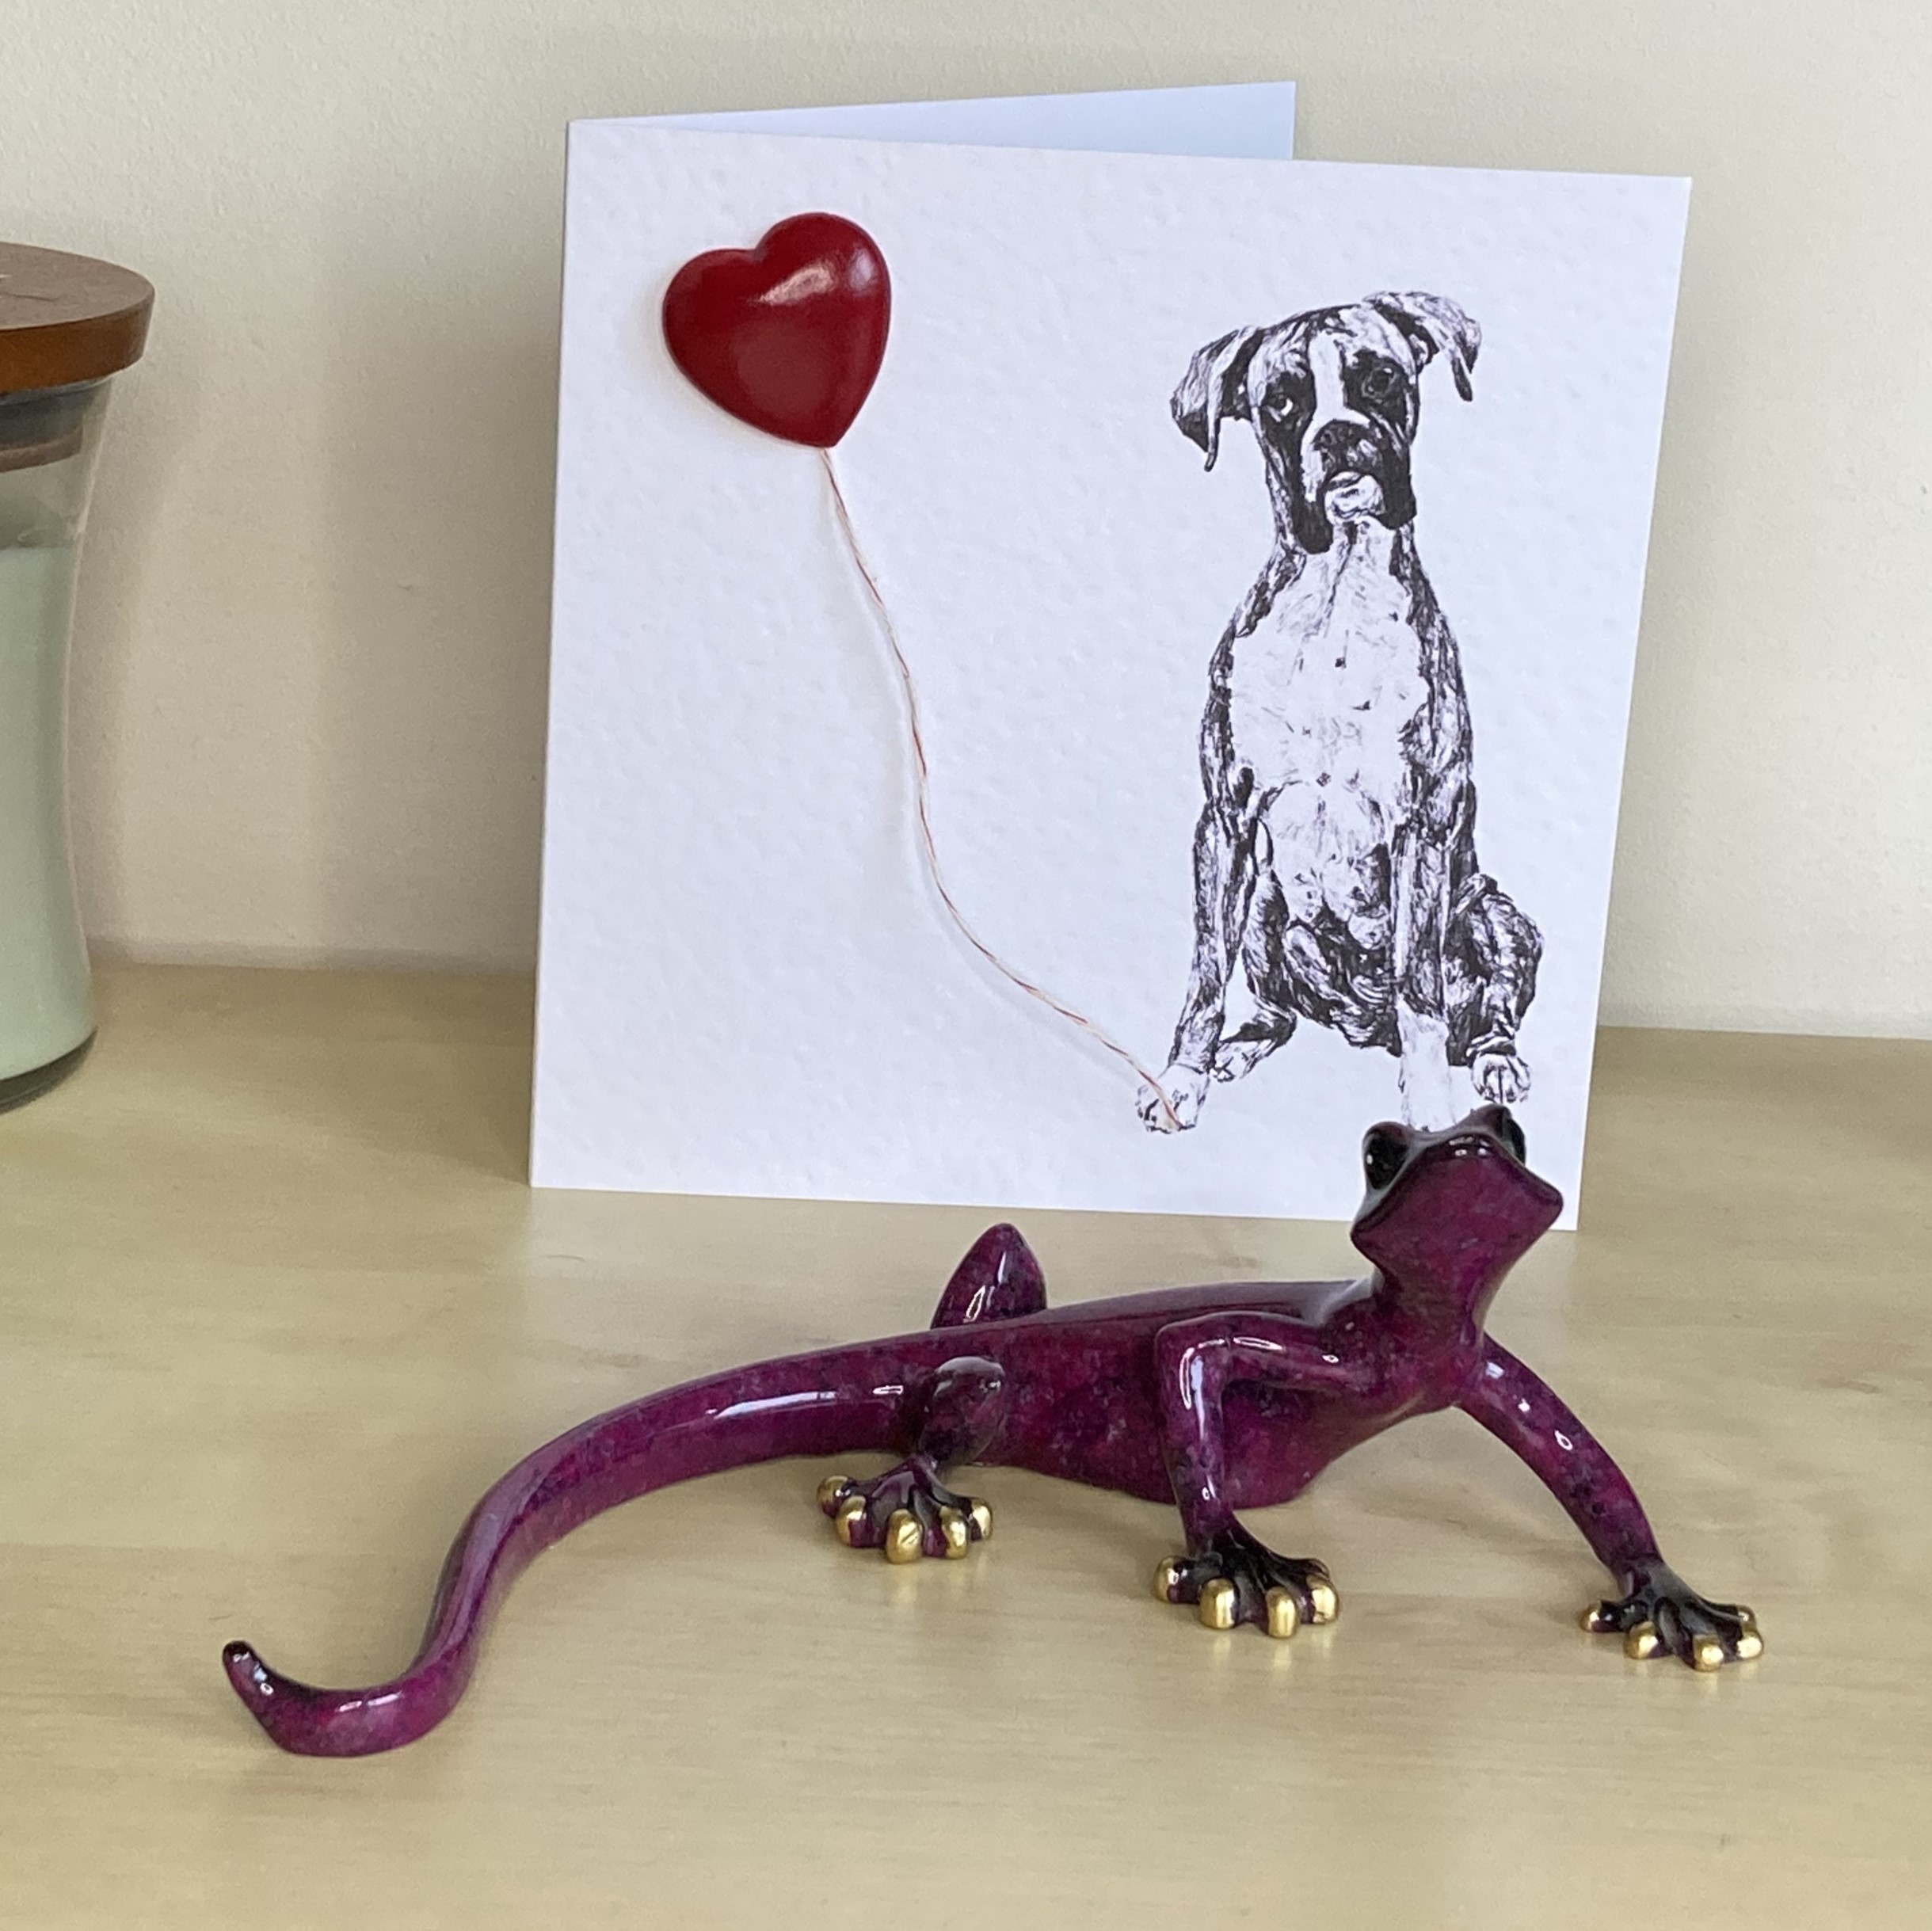 Boxer 15cm greetings card with 3D red heart balloon